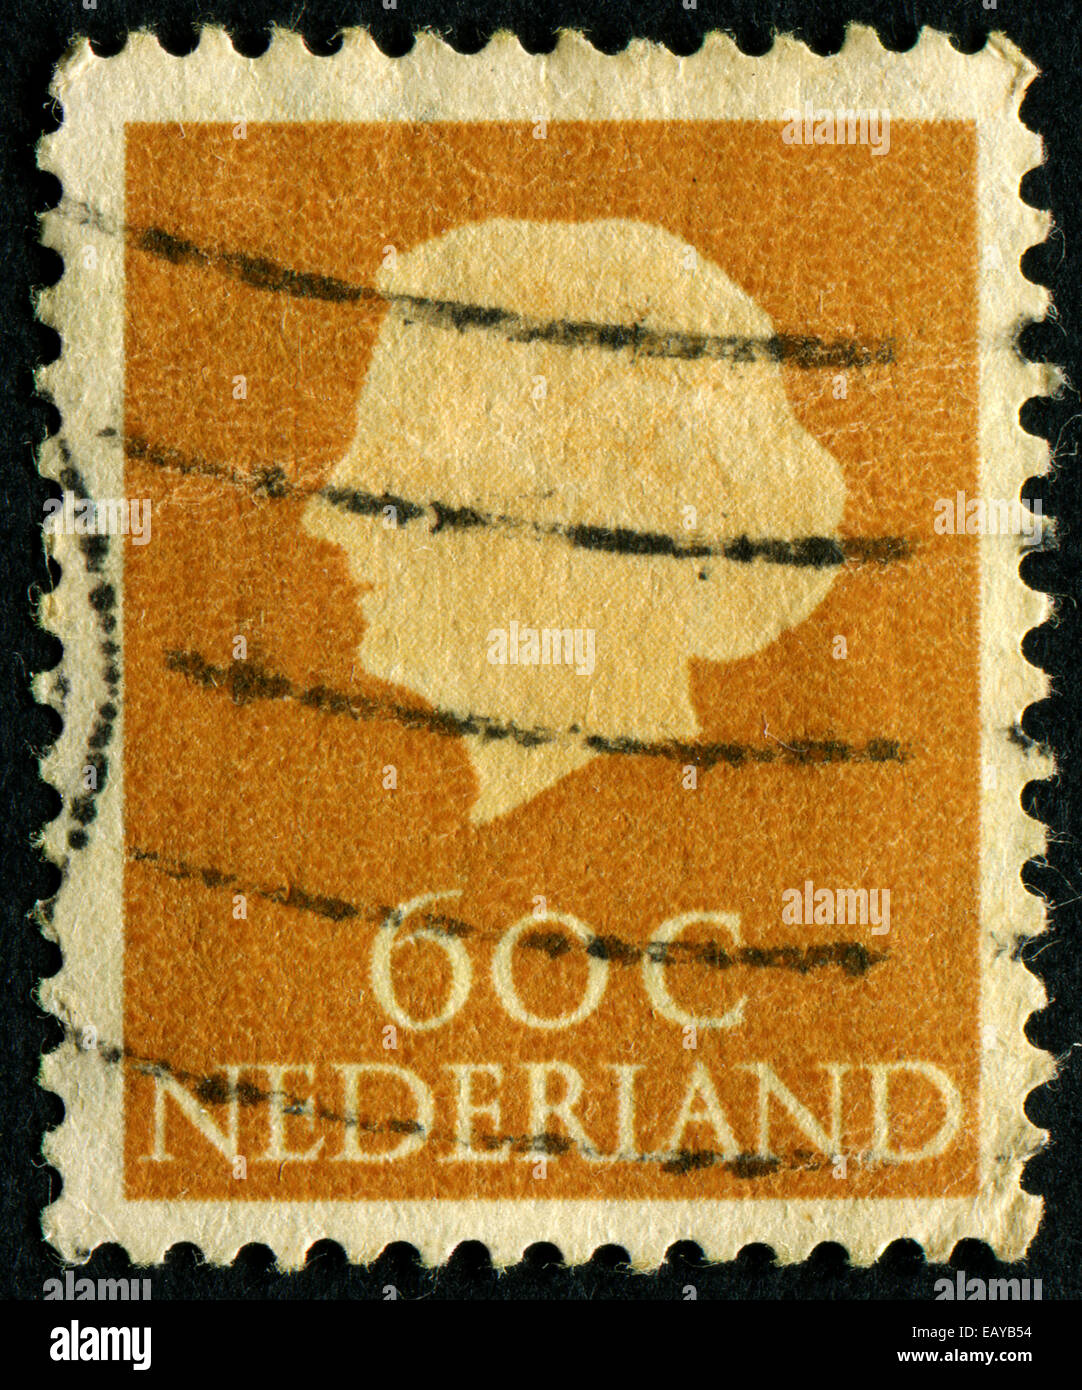 NETHERLANDS - CIRCA 1953: A stamp printed in the Netherlands shows Queen Juliana, circa 1953. Was Queen of Netherlands. Stock Photo